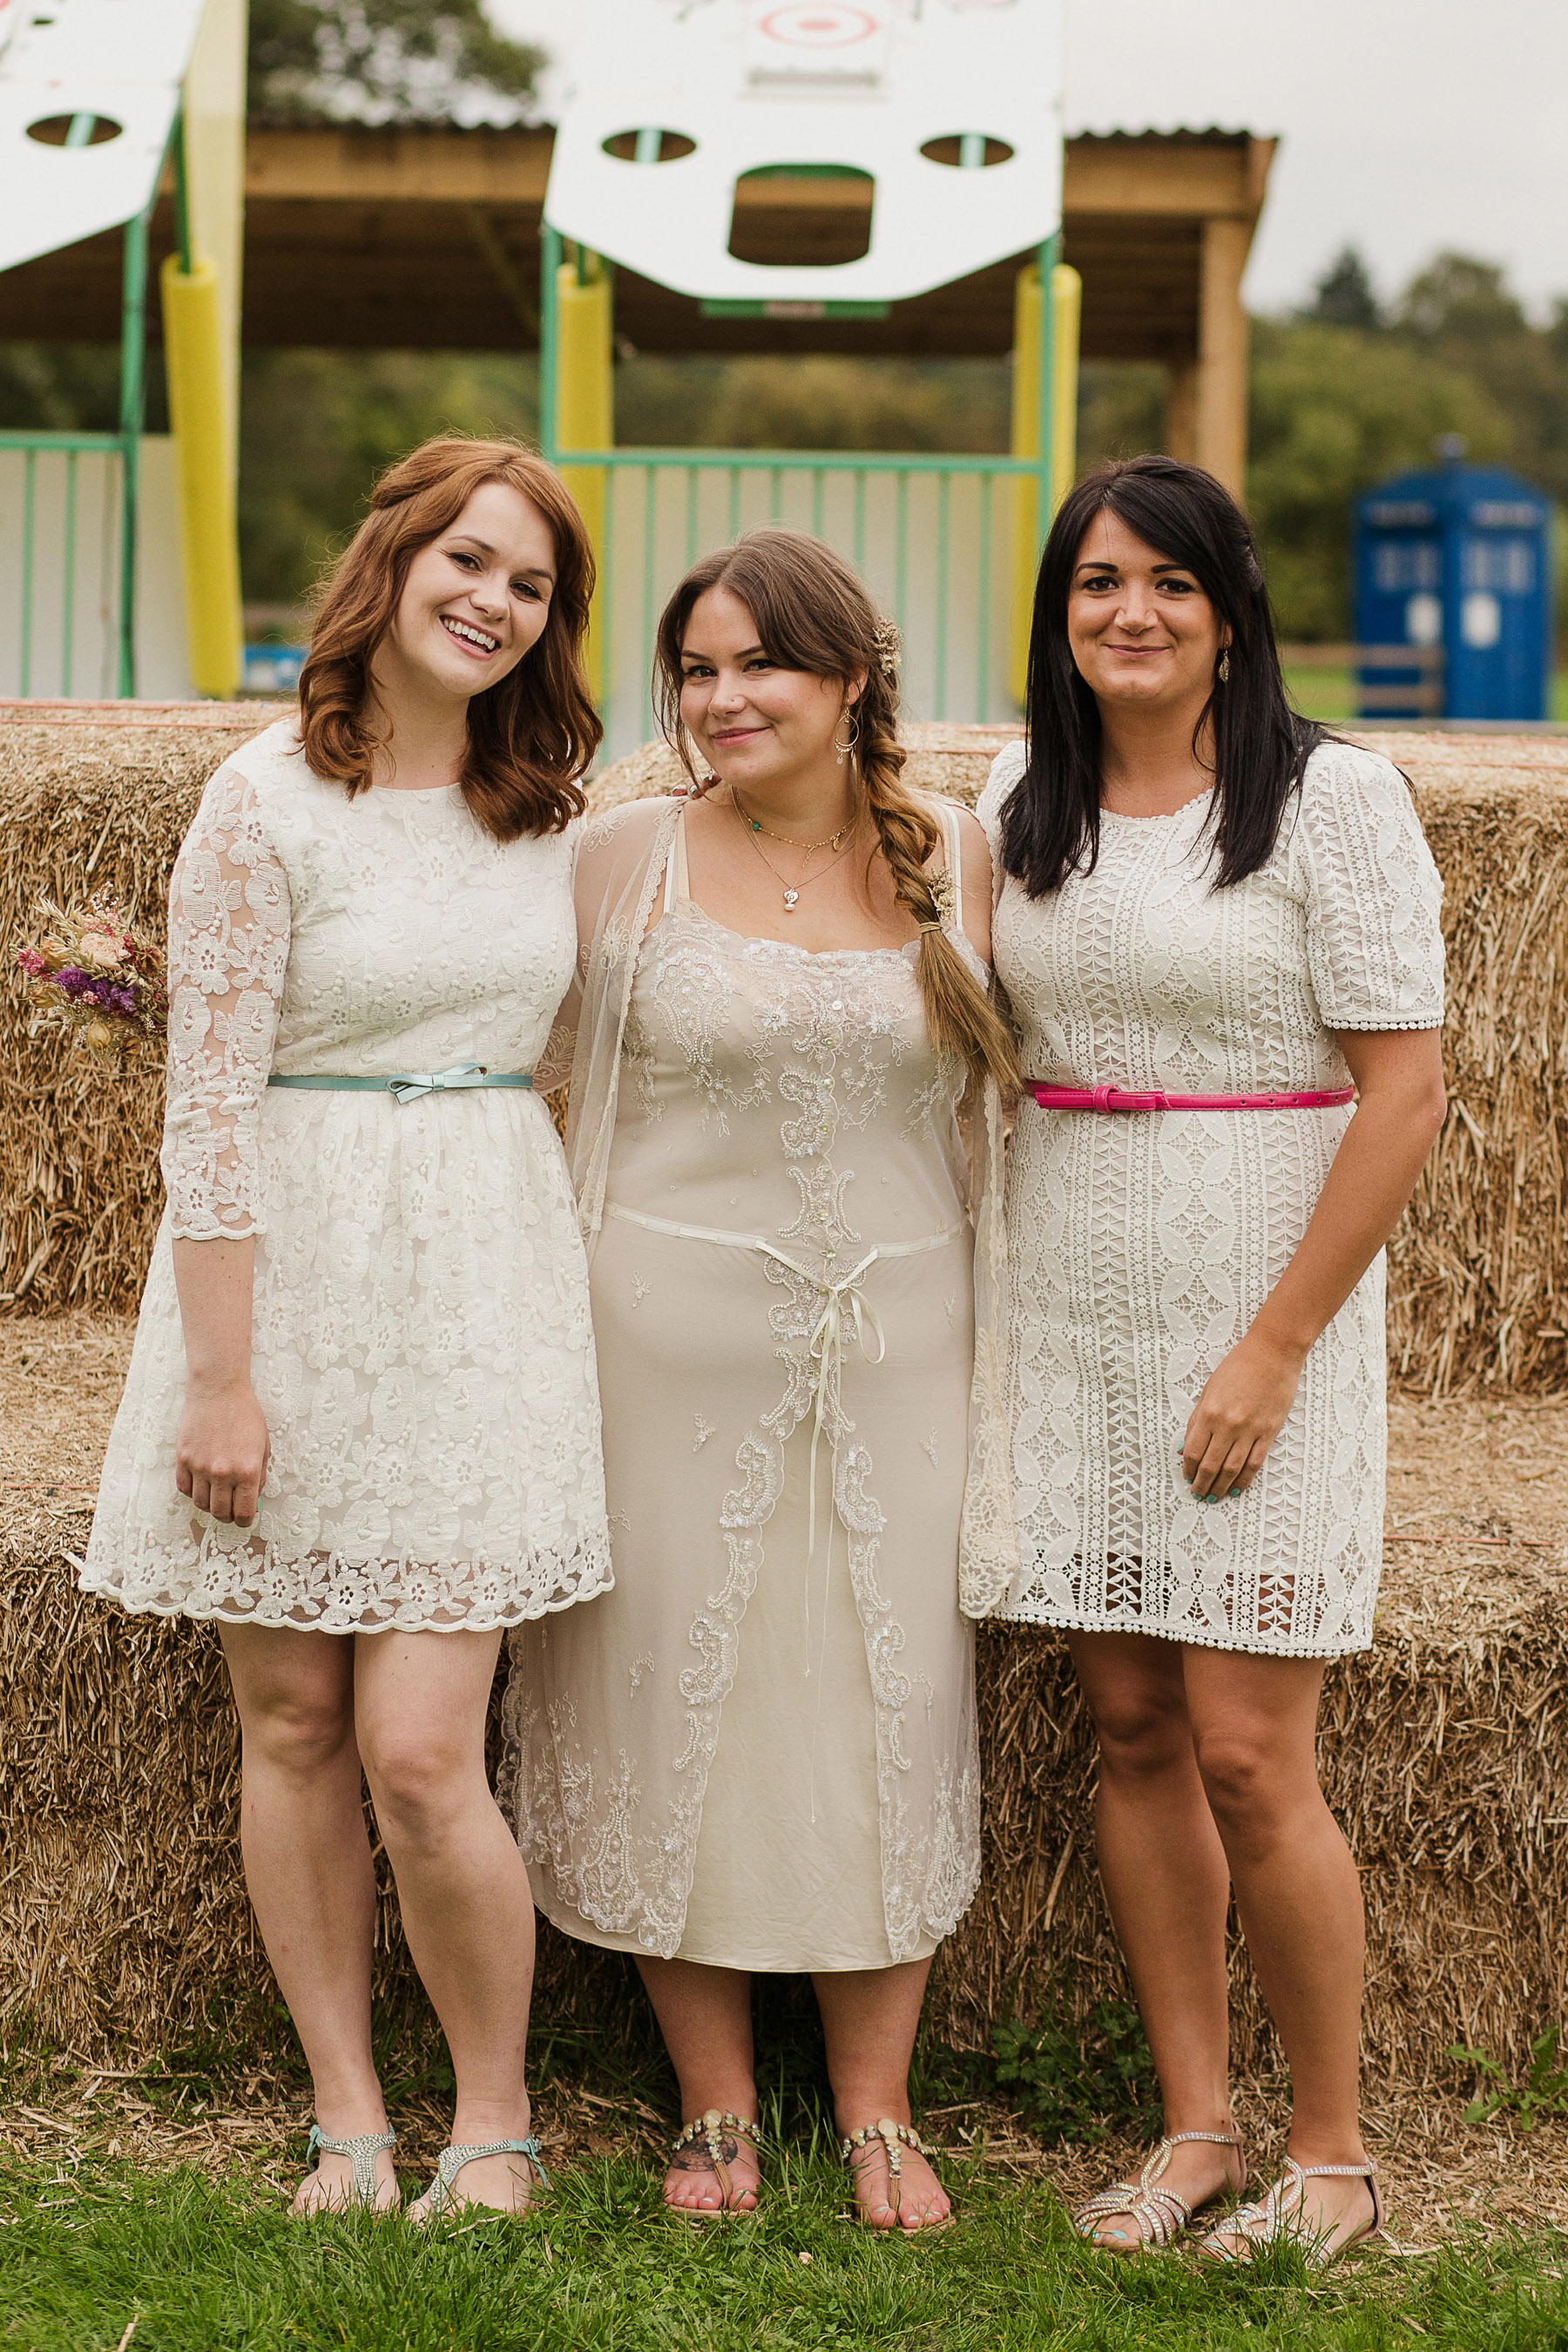 Sally + Bob's awesome country rustic wedding at York Maze.